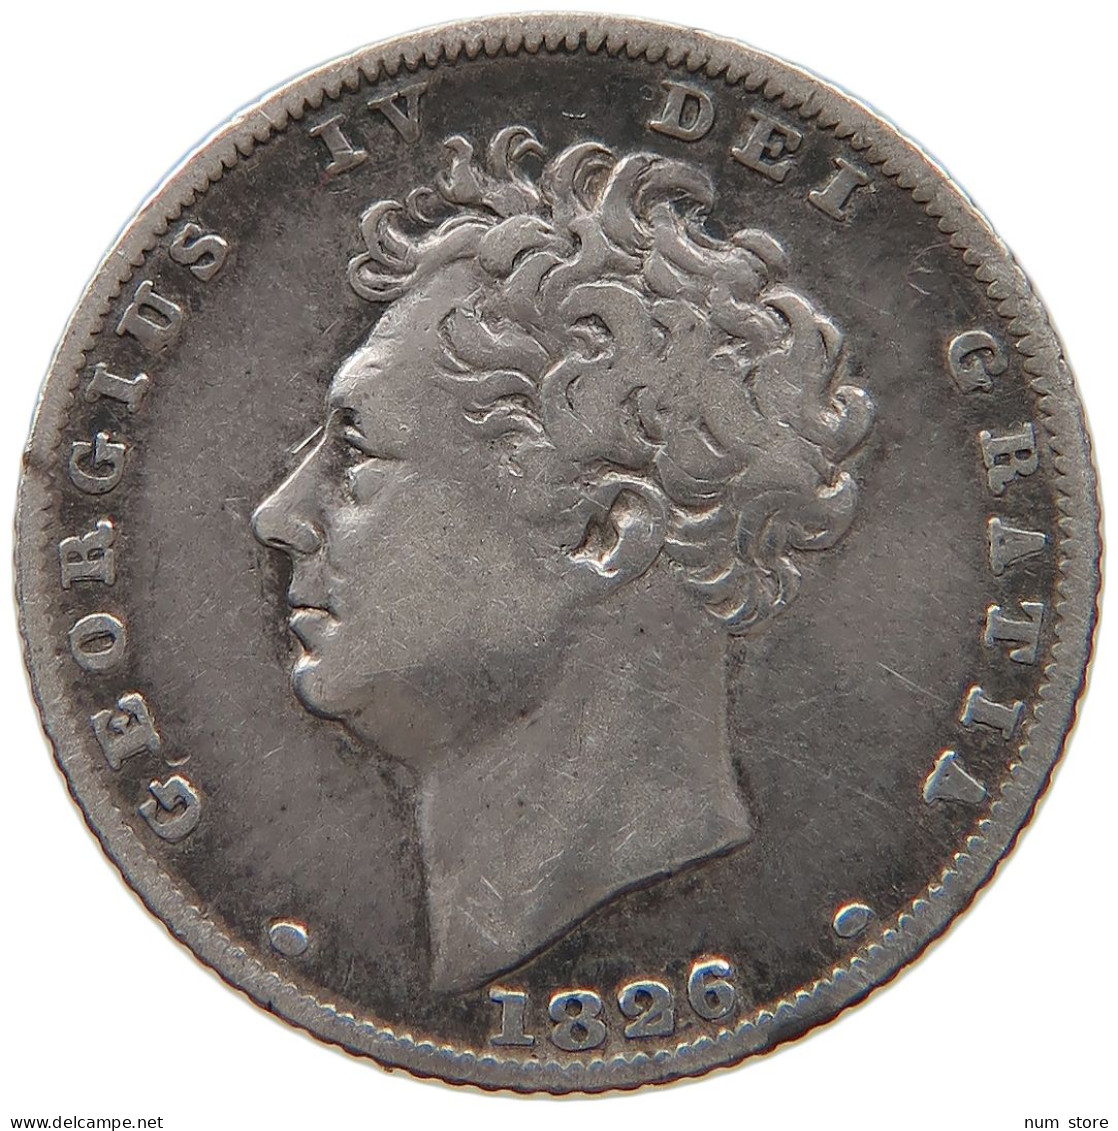 GREAT BRITAIN SIXPENCE 1826 GEORGE IV. (1820-1830) #t162 0205 - H. 6 Pence